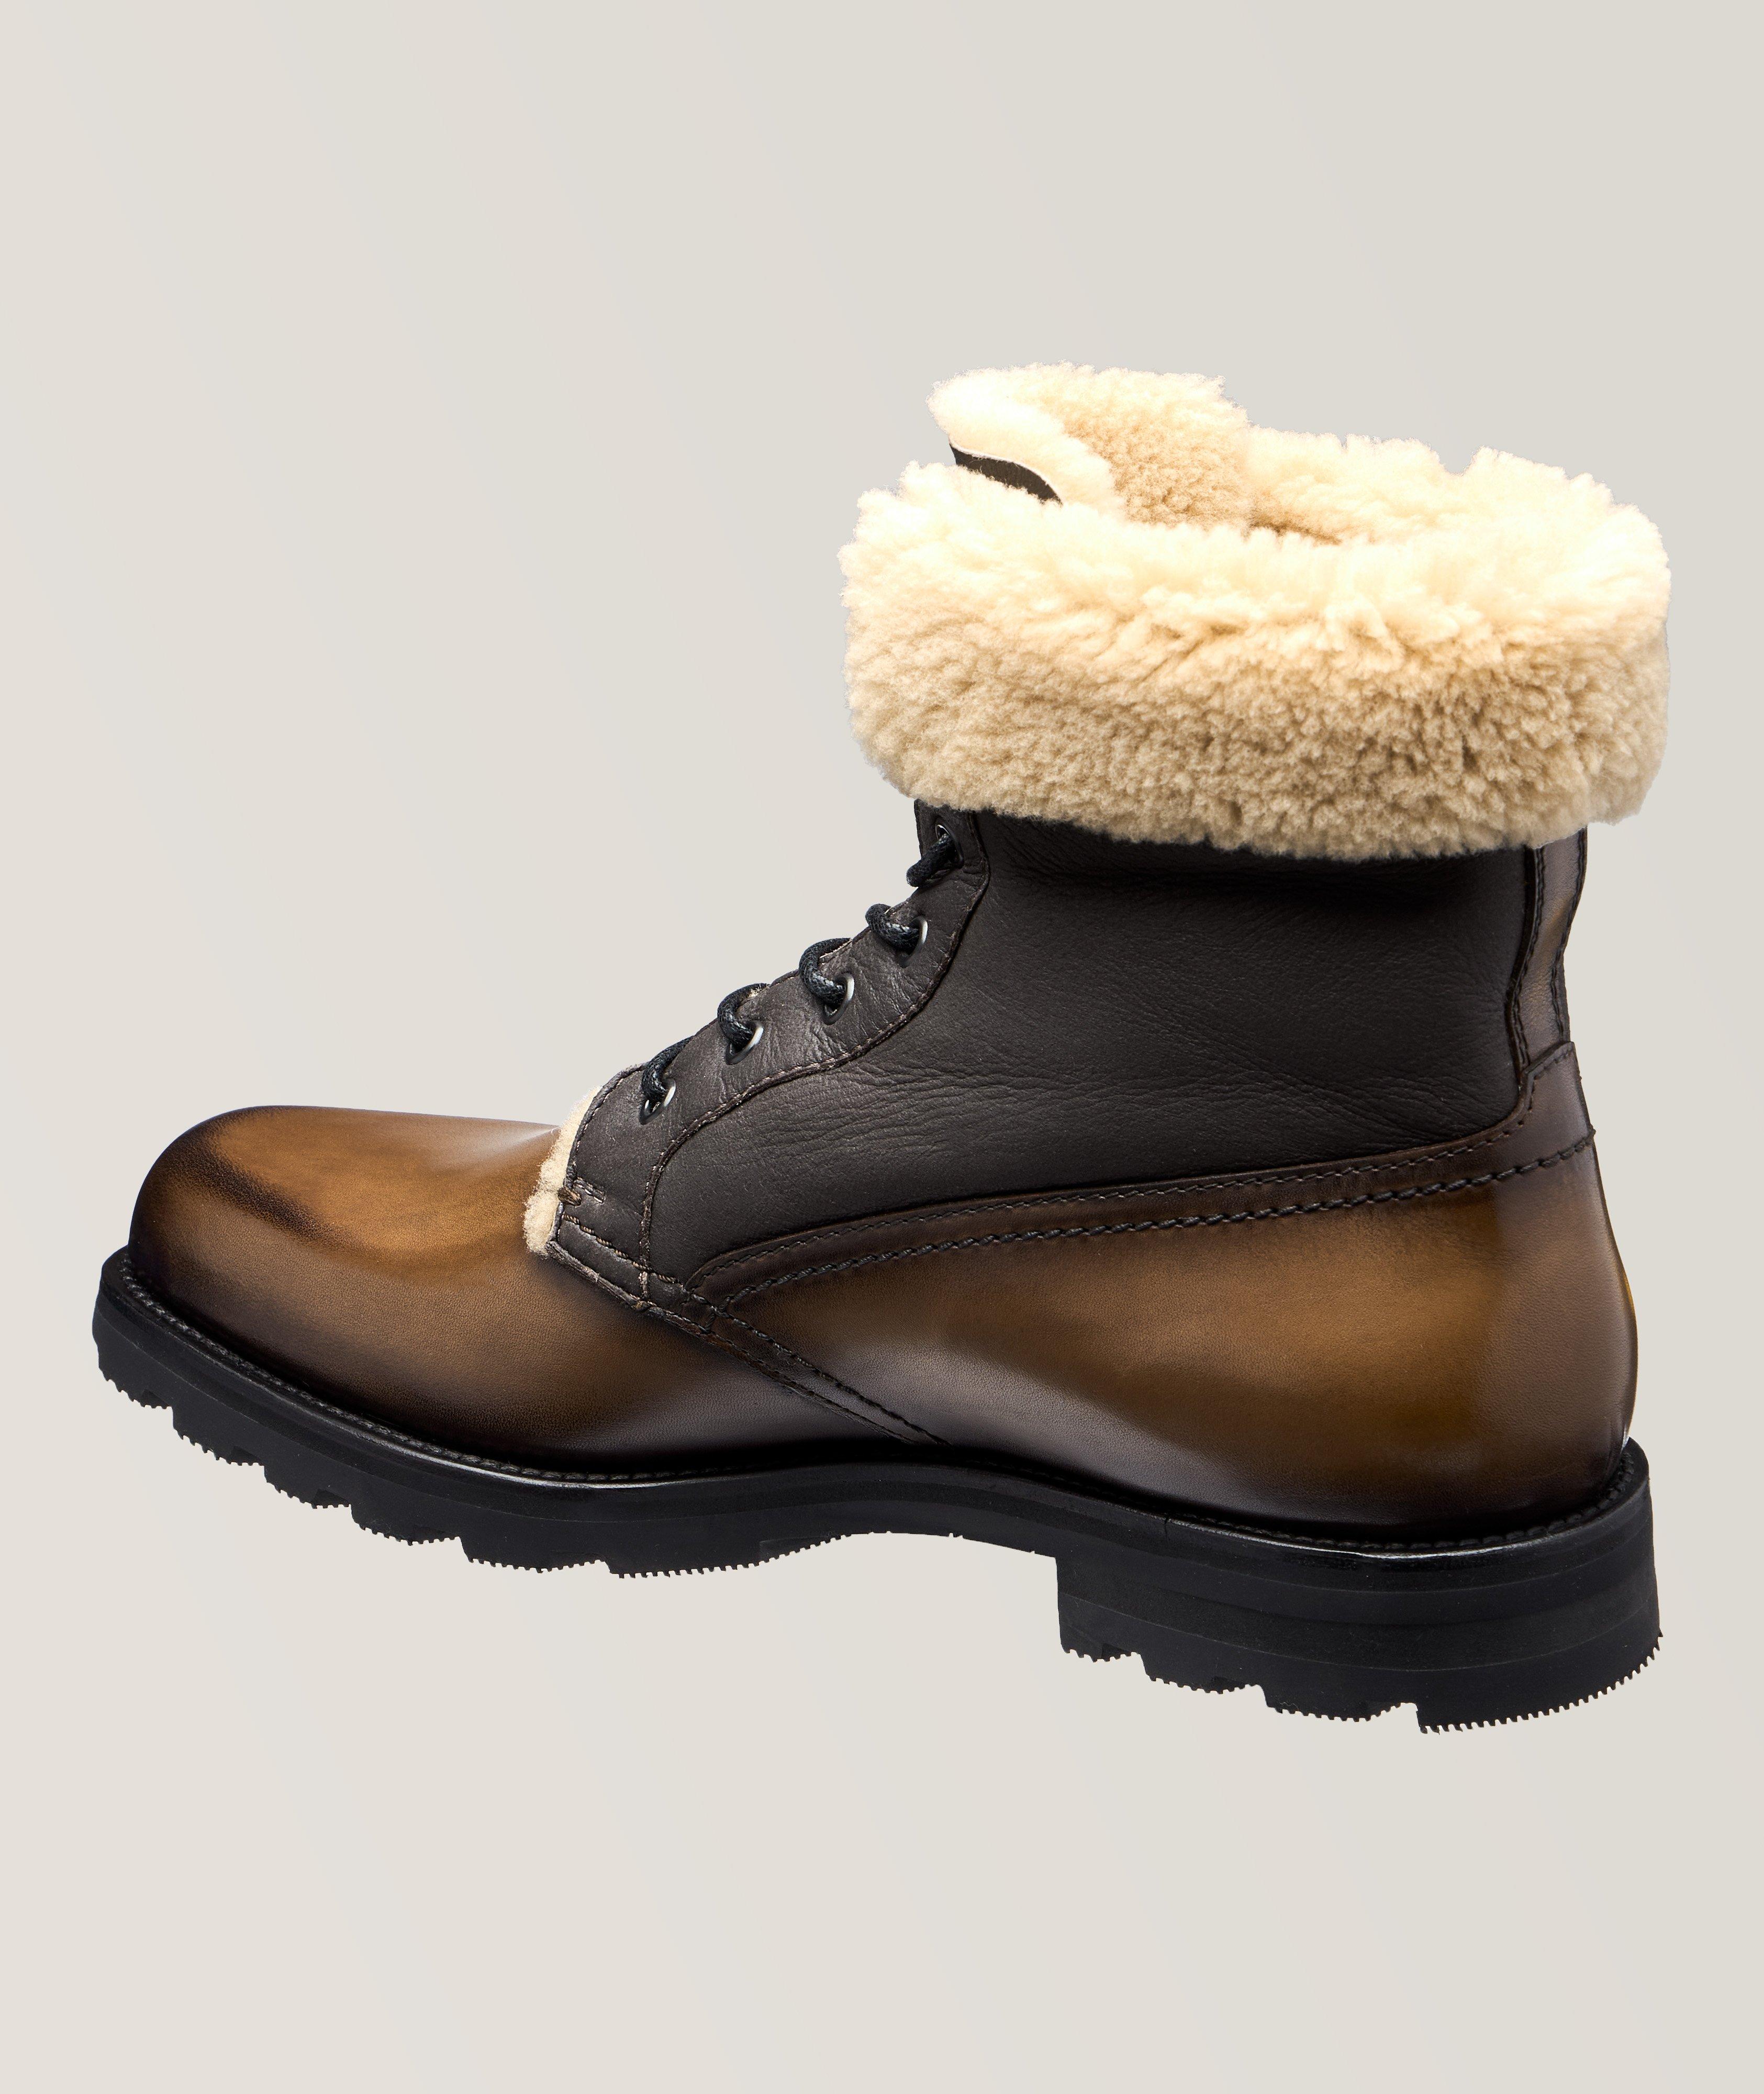 Ultima Shearling & Leather Boots image 1